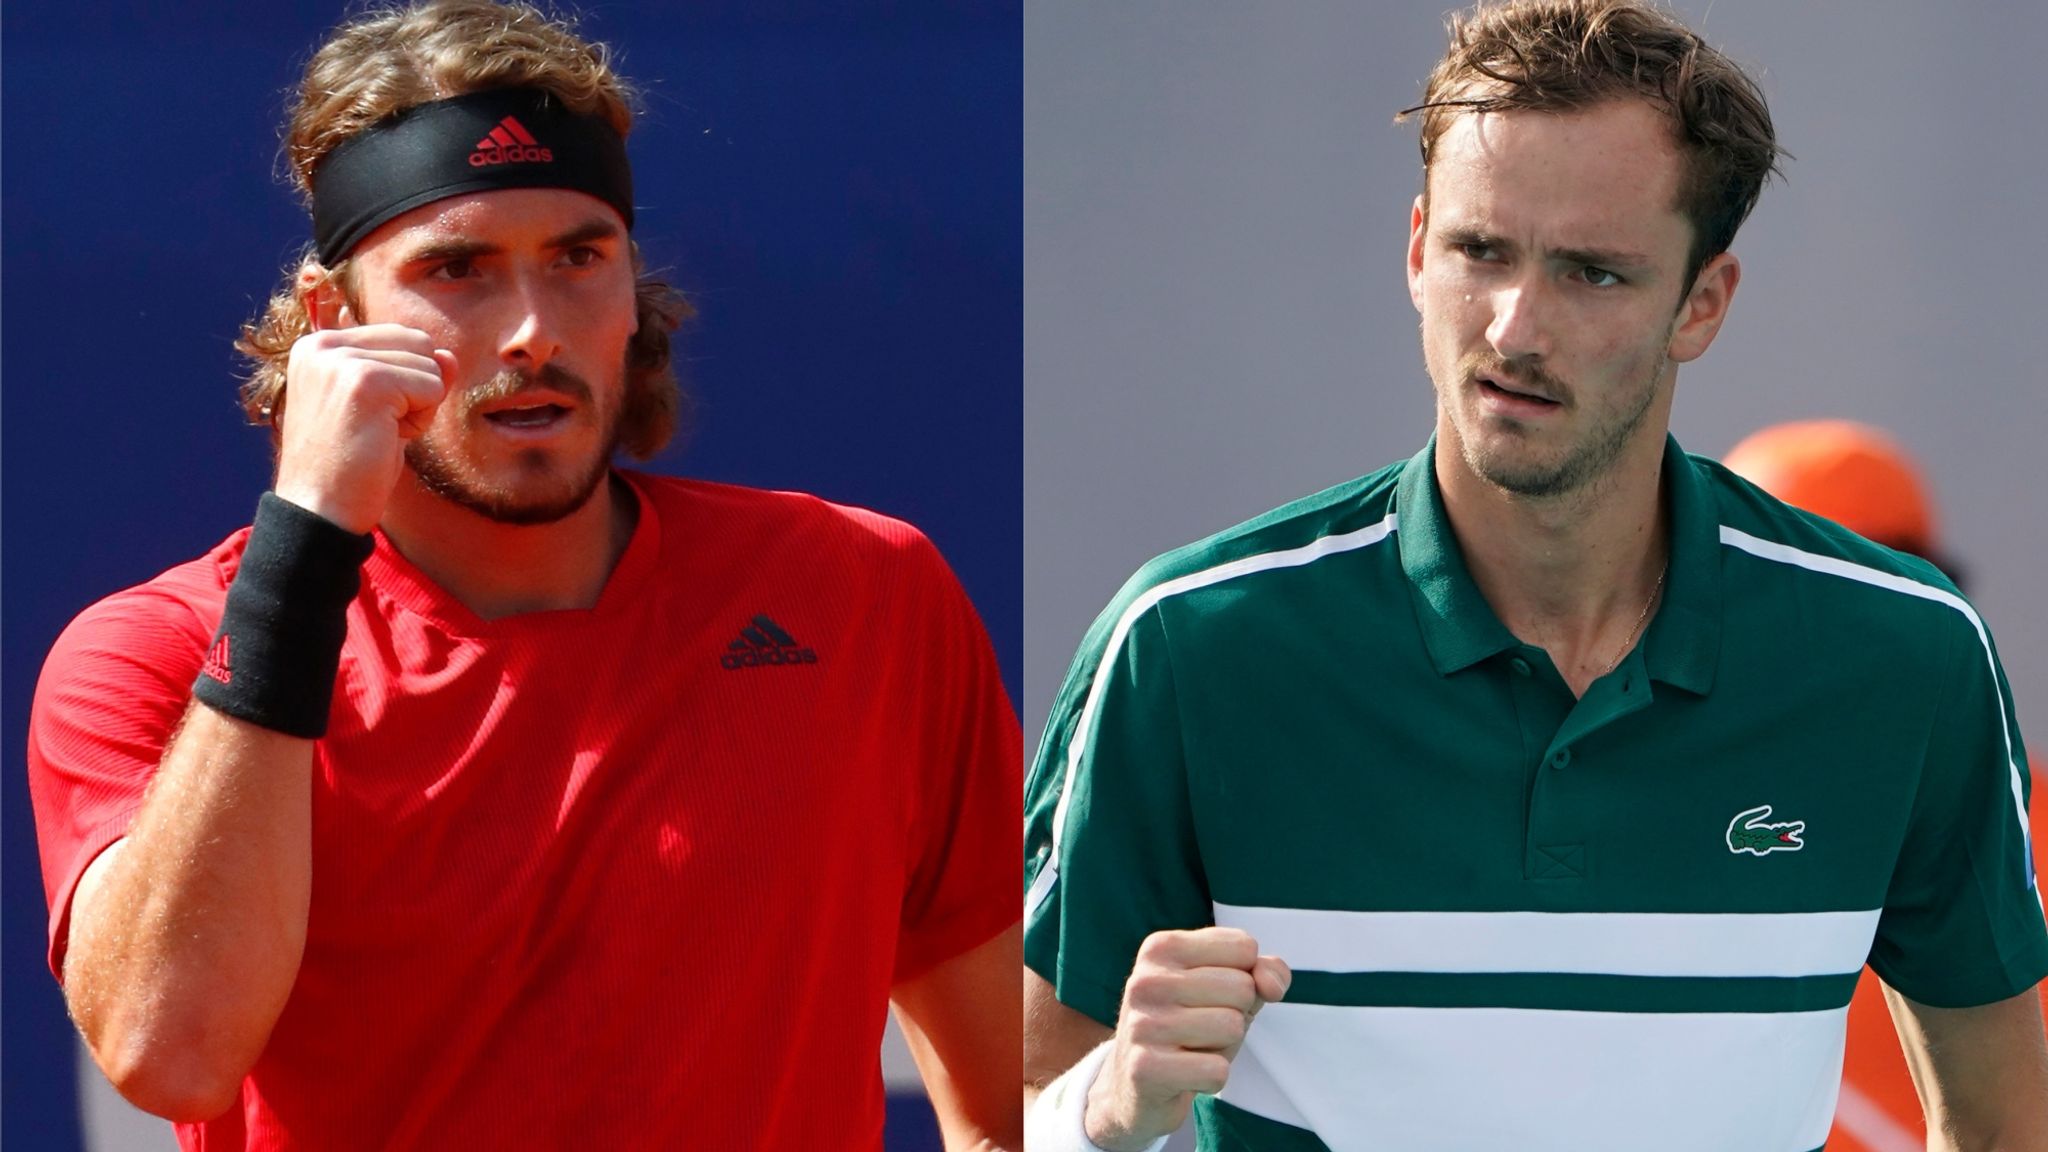 French Open Stefanos Tsitsipas and Daniil Medvedev are happy to see tennis Big Three in opposite half of the draw Tennis News Sky Sports